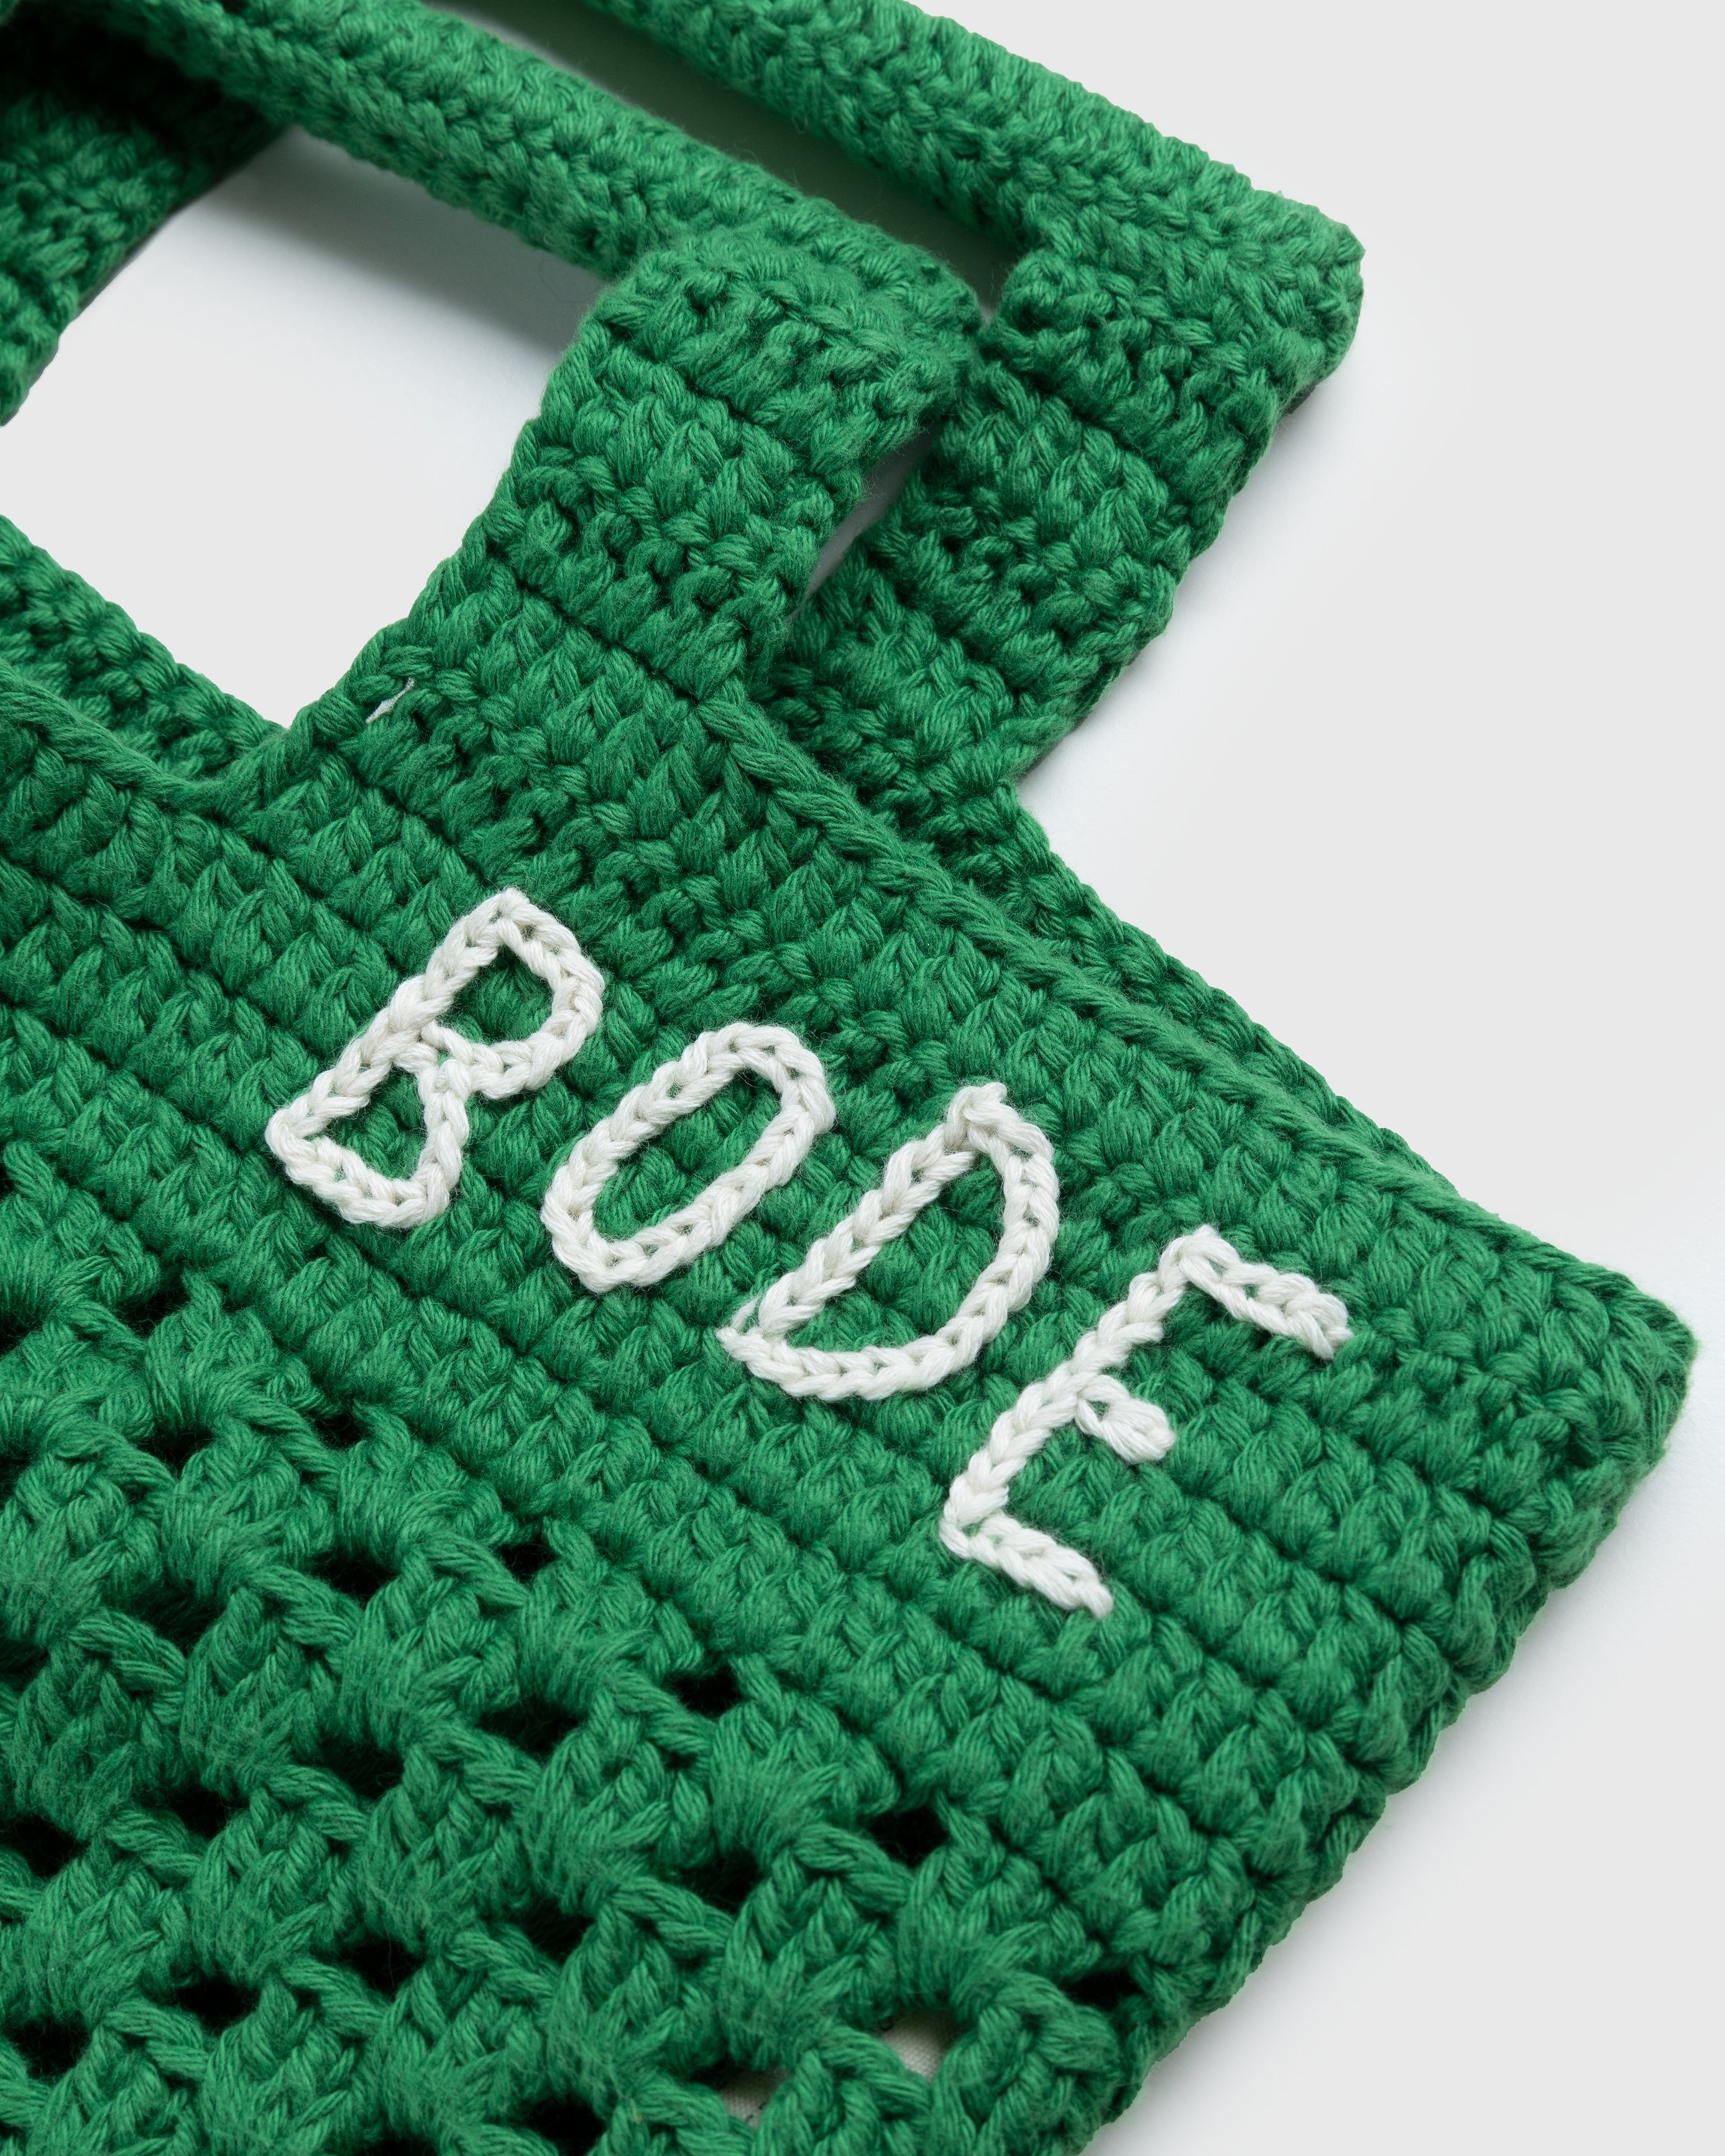 Bode – Crochet Tote Green - Tote Bags - Green - Image 4